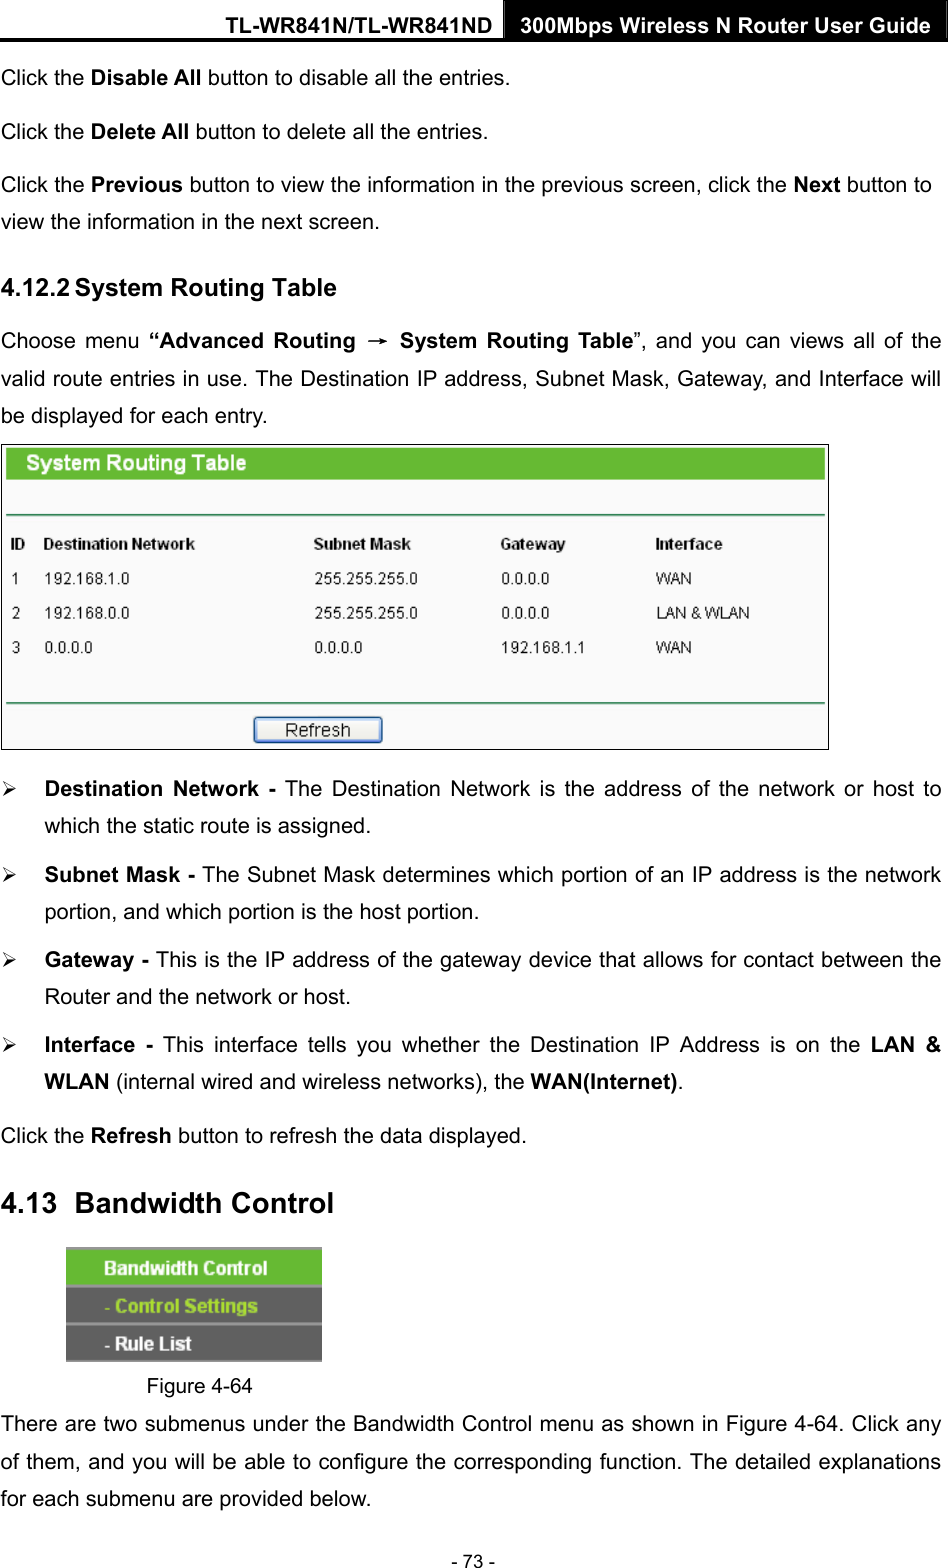 TL-WR841N/TL-WR841ND 300Mbps Wireless N Router User Guide - 73 - Click the Disable All button to disable all the entries. Click the Delete All button to delete all the entries. Click the Previous button to view the information in the previous screen, click the Next button to view the information in the next screen. 4.12.2 System Routing Table Choose menu “Advanced Routing → System Routing Table”, and you can views all of the valid route entries in use. The Destination IP address, Subnet Mask, Gateway, and Interface will be displayed for each entry.  ¾ Destination Network - The Destination Network is the address of the network or host to which the static route is assigned.   ¾ Subnet Mask - The Subnet Mask determines which portion of an IP address is the network portion, and which portion is the host portion.   ¾ Gateway - This is the IP address of the gateway device that allows for contact between the Router and the network or host.   ¾ Interface - This interface tells you whether the Destination IP Address is on the LAN &amp; WLAN (internal wired and wireless networks), the WAN(Internet).  Click the Refresh button to refresh the data displayed. 4.13   Bandwidth Control  Figure 4-64 There are two submenus under the Bandwidth Control menu as shown in Figure 4-64. Click any of them, and you will be able to configure the corresponding function. The detailed explanations for each submenu are provided below. 